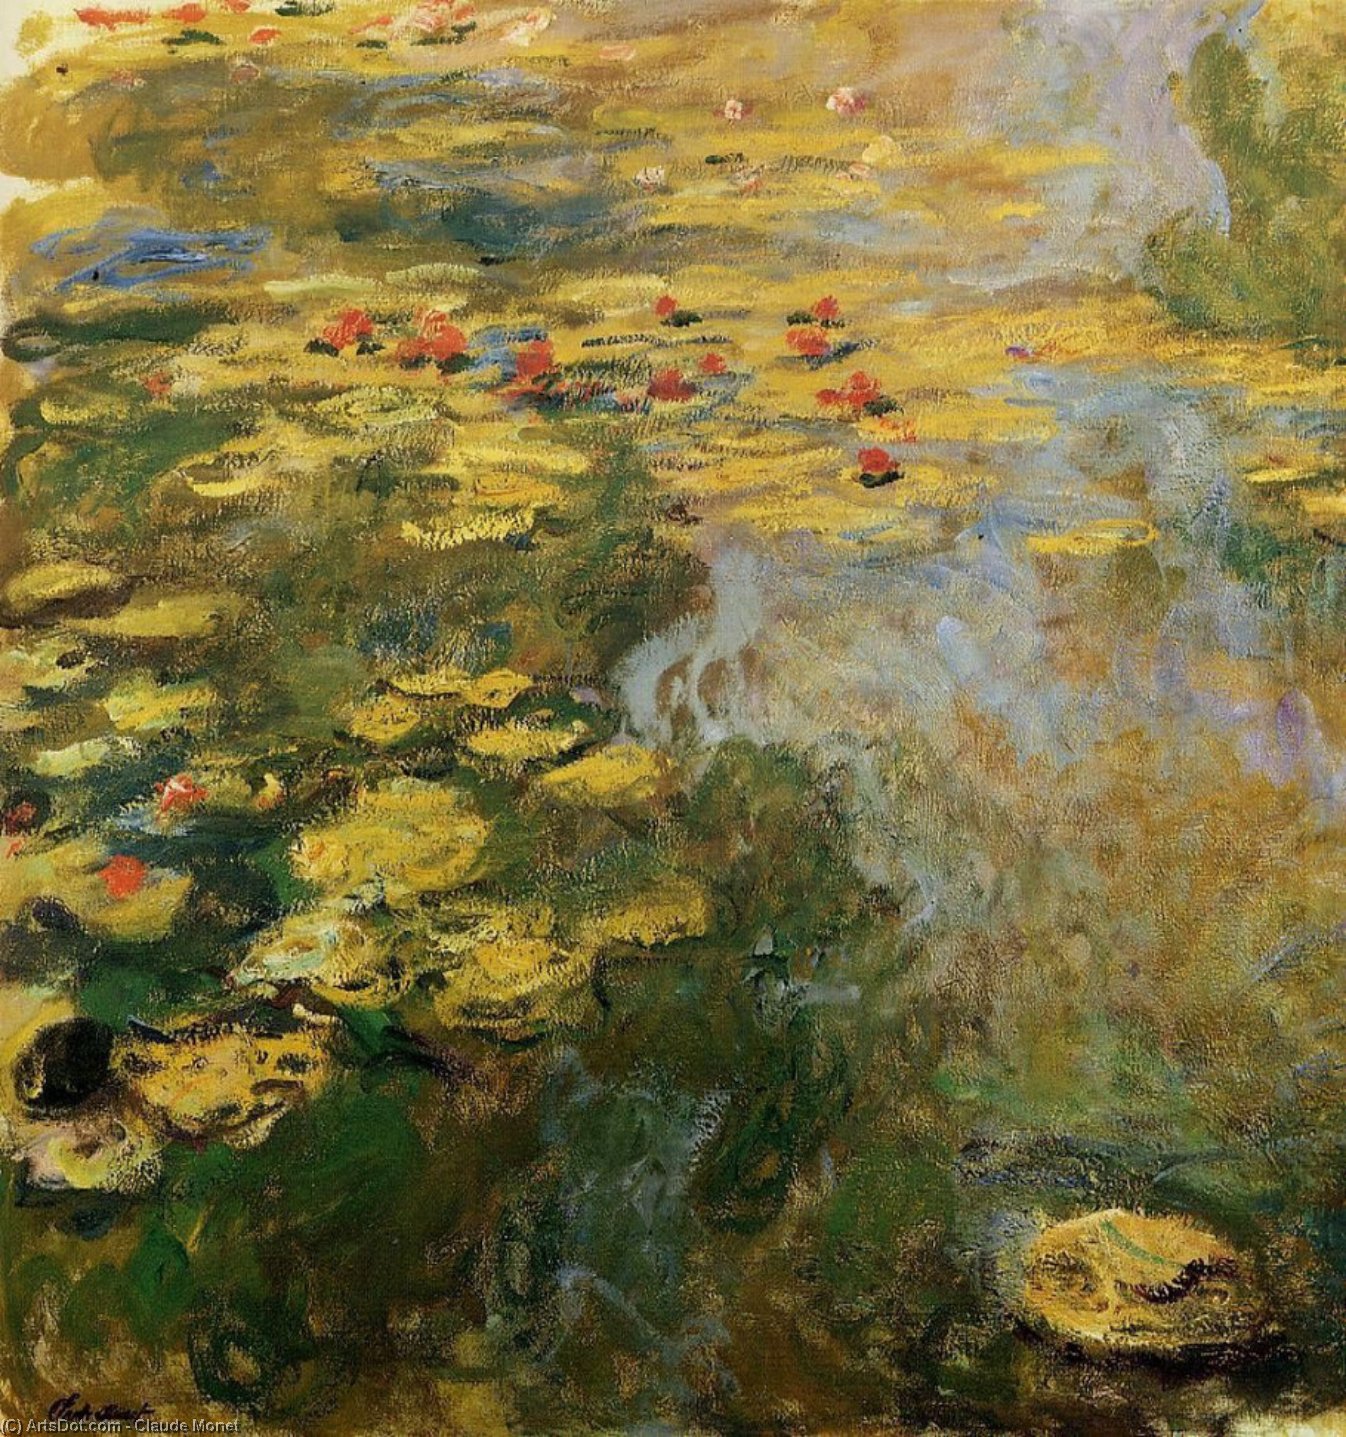 WikiOO.org - 백과 사전 - 회화, 삽화 Claude Monet - The Water-Lily Pond (left side)